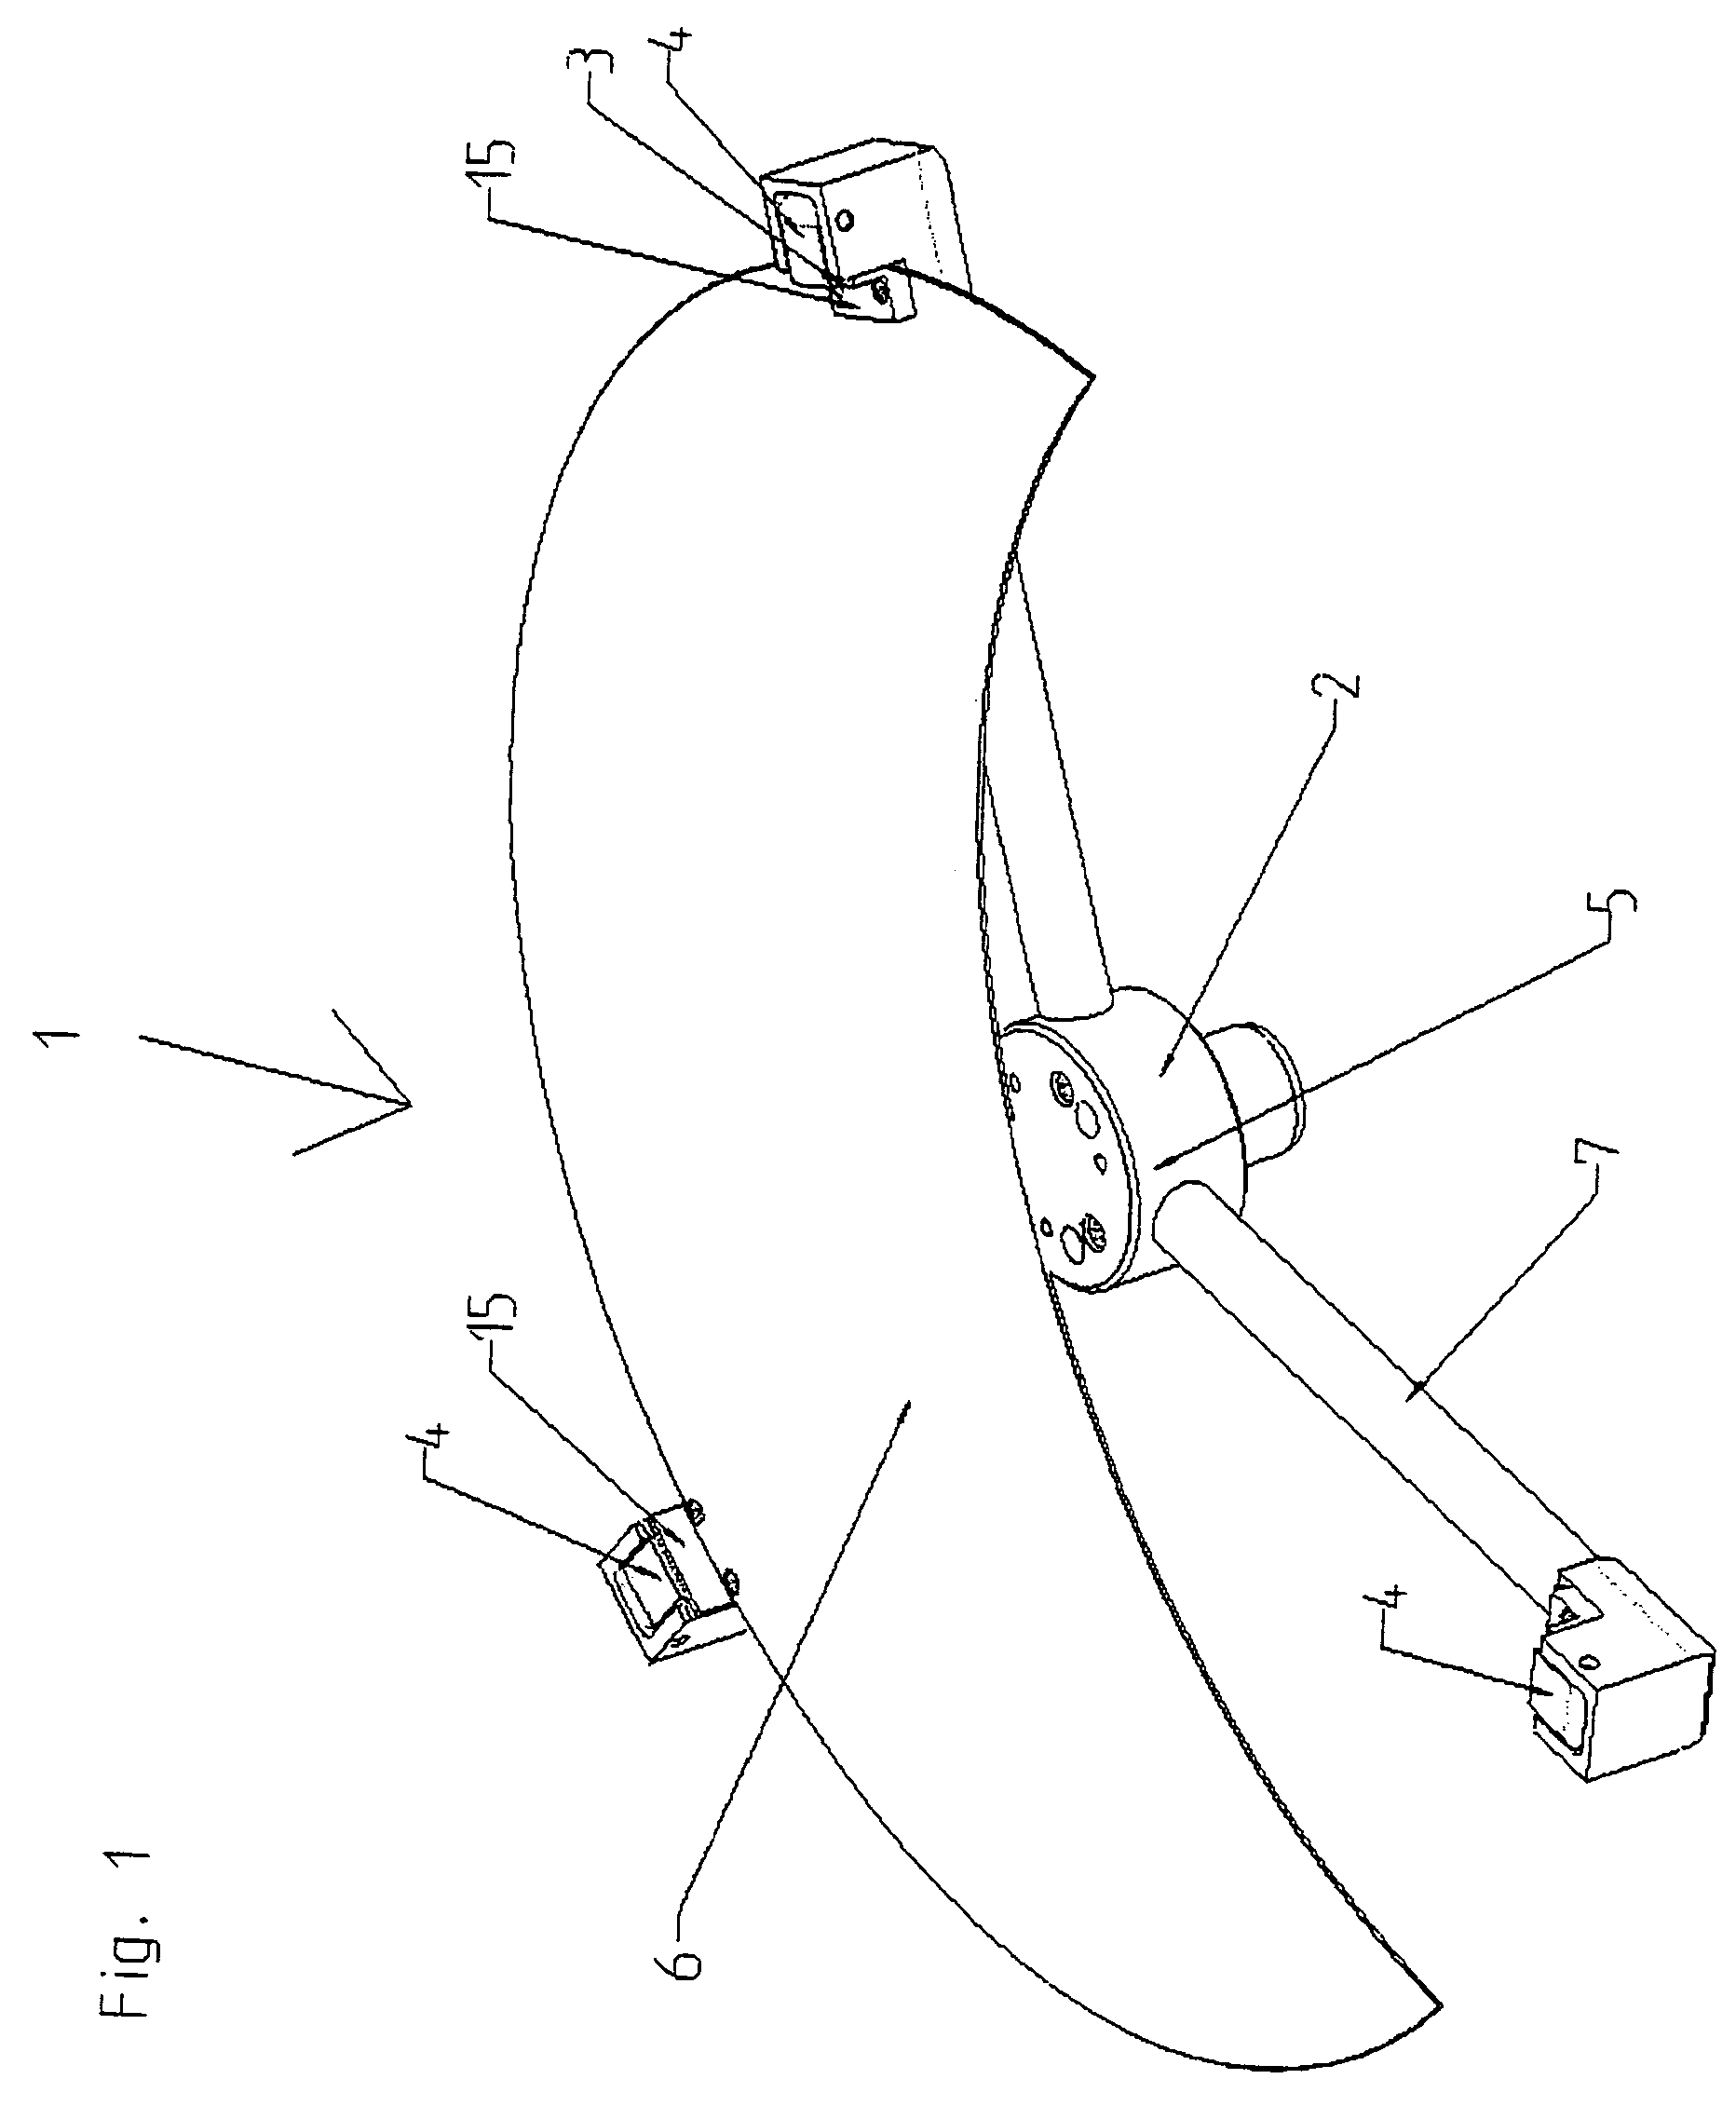 Holding device for disk-shaped objects